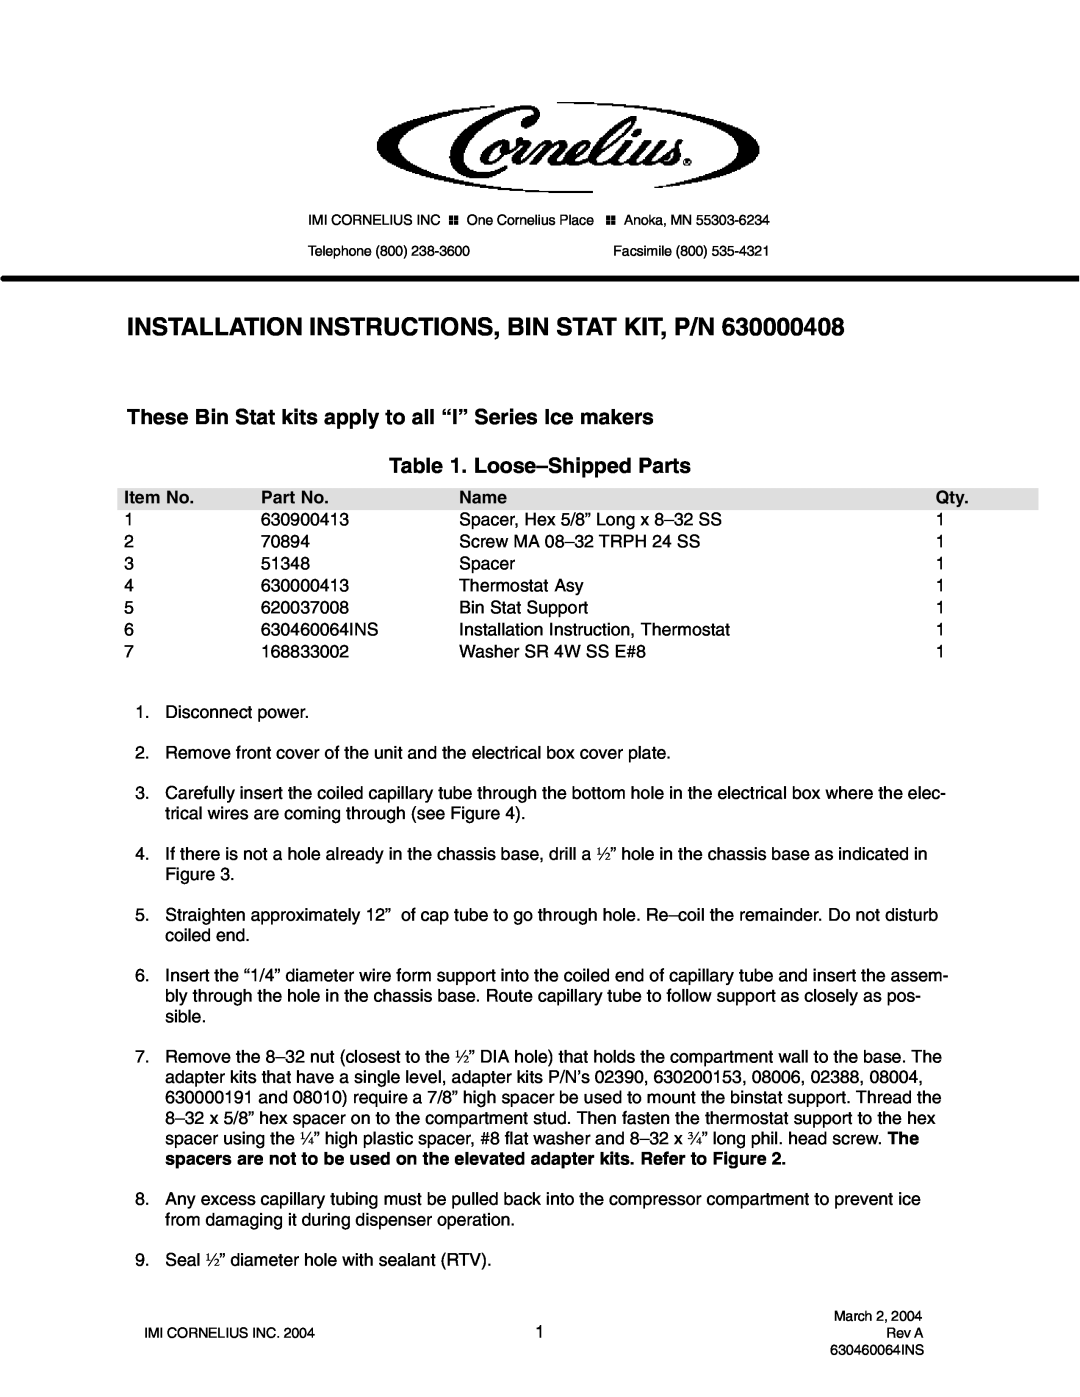 Cornelius P/N 630900413 installation instructions Installation Instructions, Bin Stat Kit, P/N, Loose-Shipped Parts, Name 